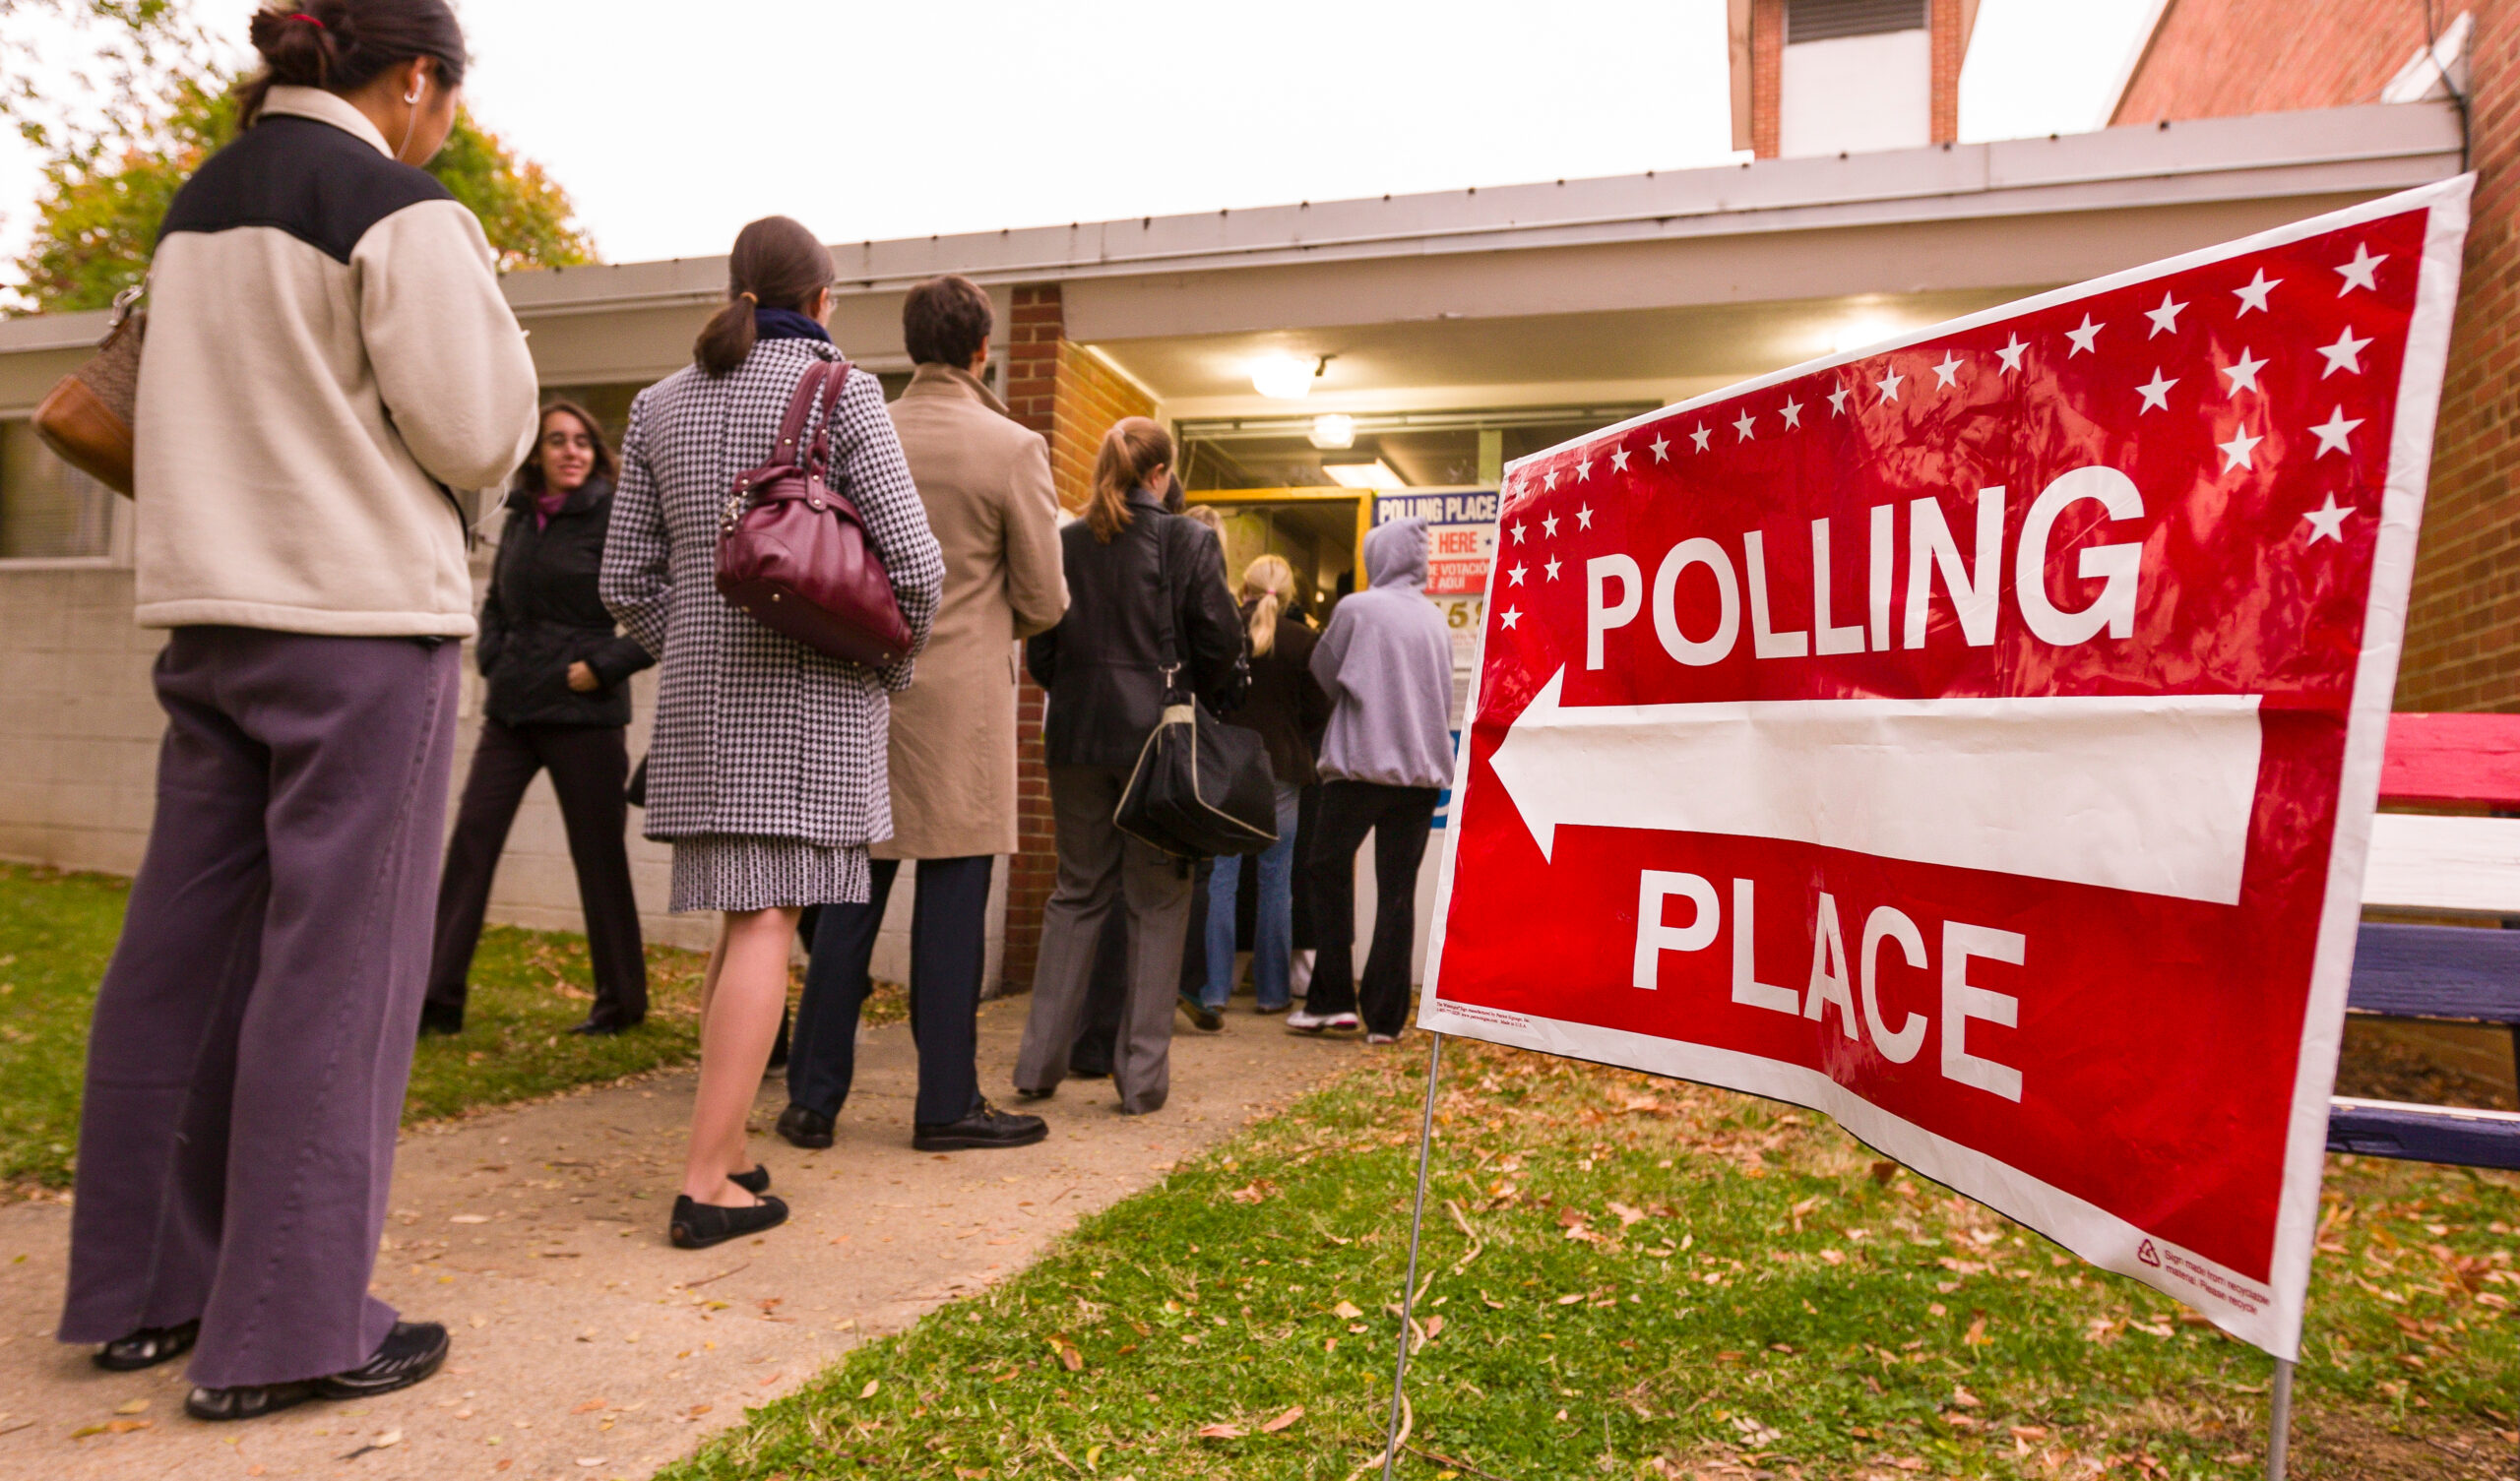 Voters lined up at a polling place.